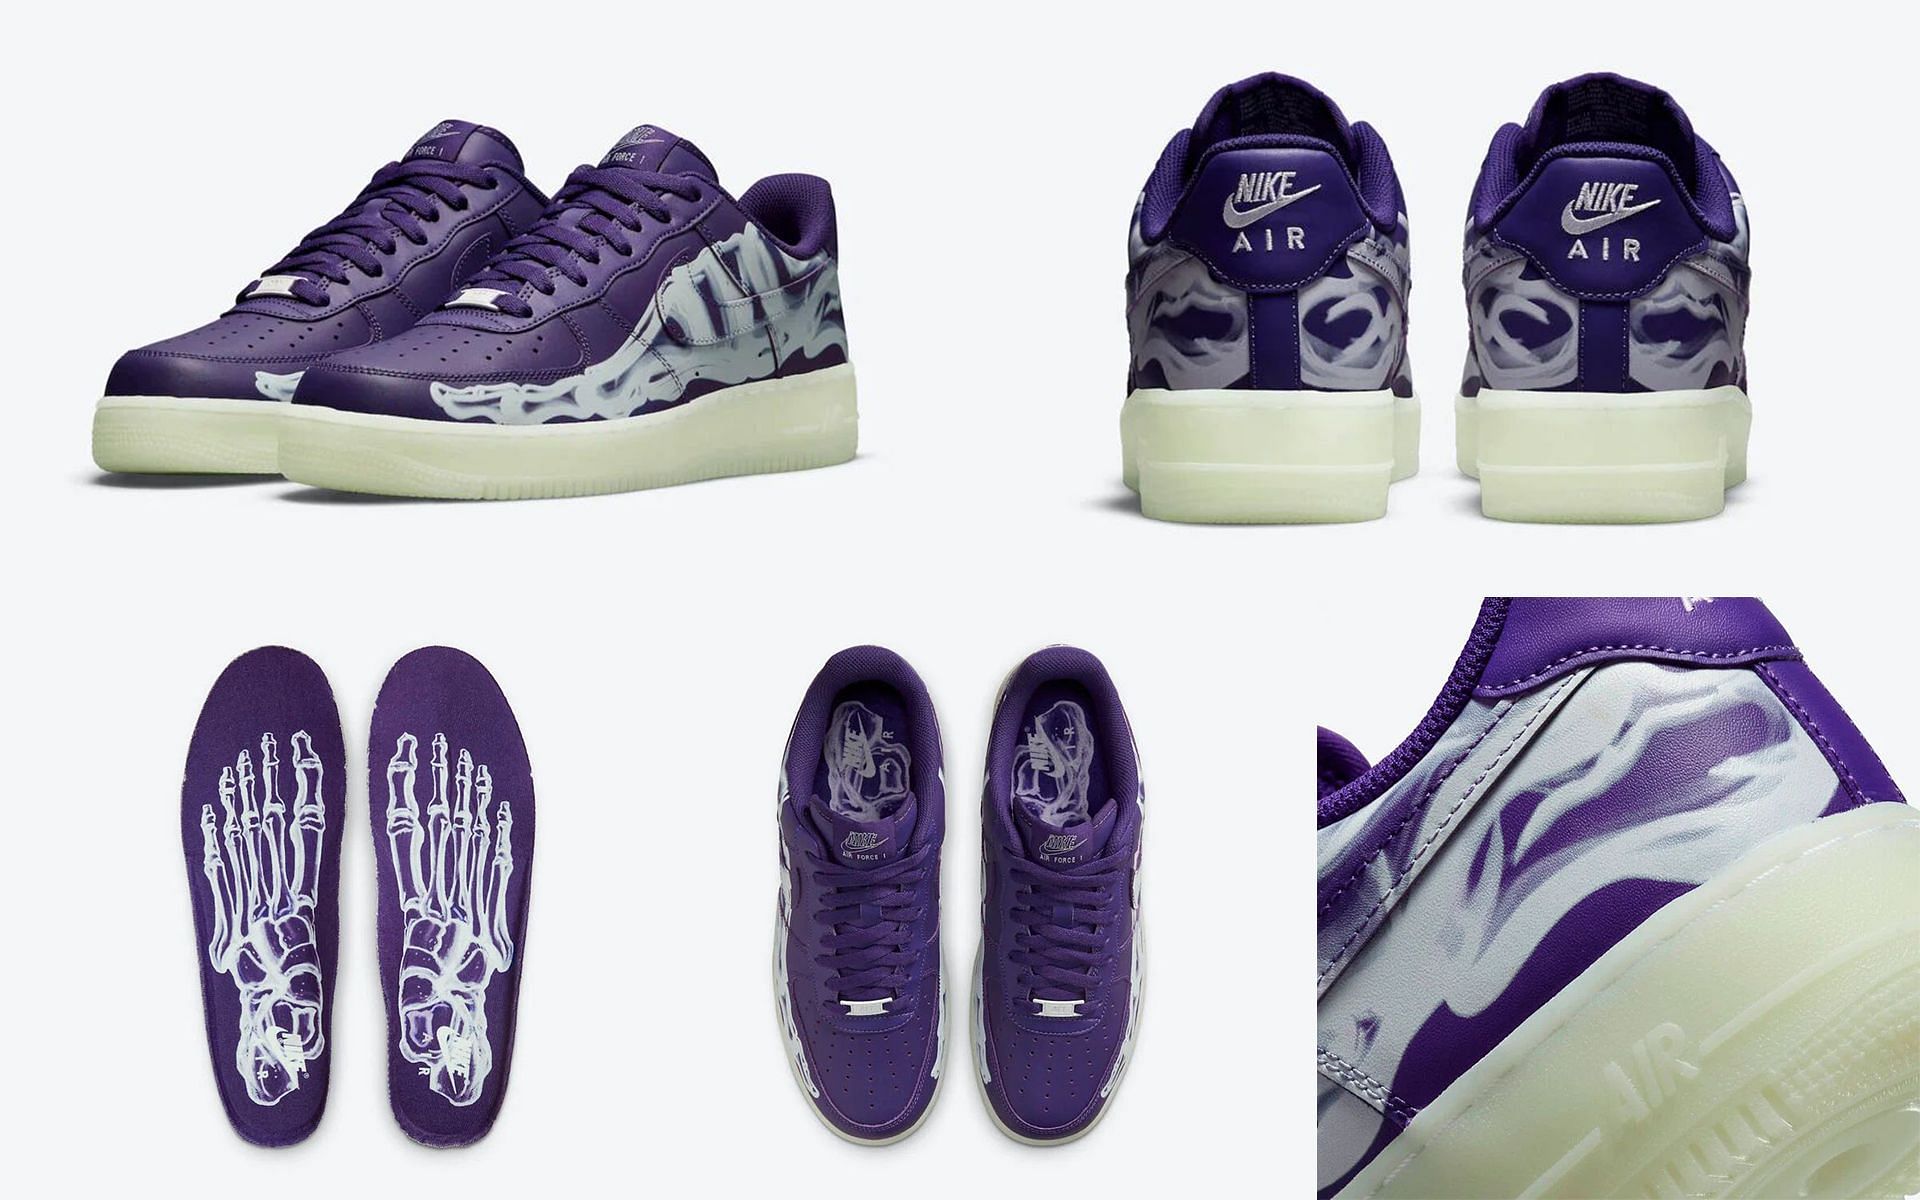 to buy Air Force 1 Purple Skeleton shoes? Release date, and more details explored